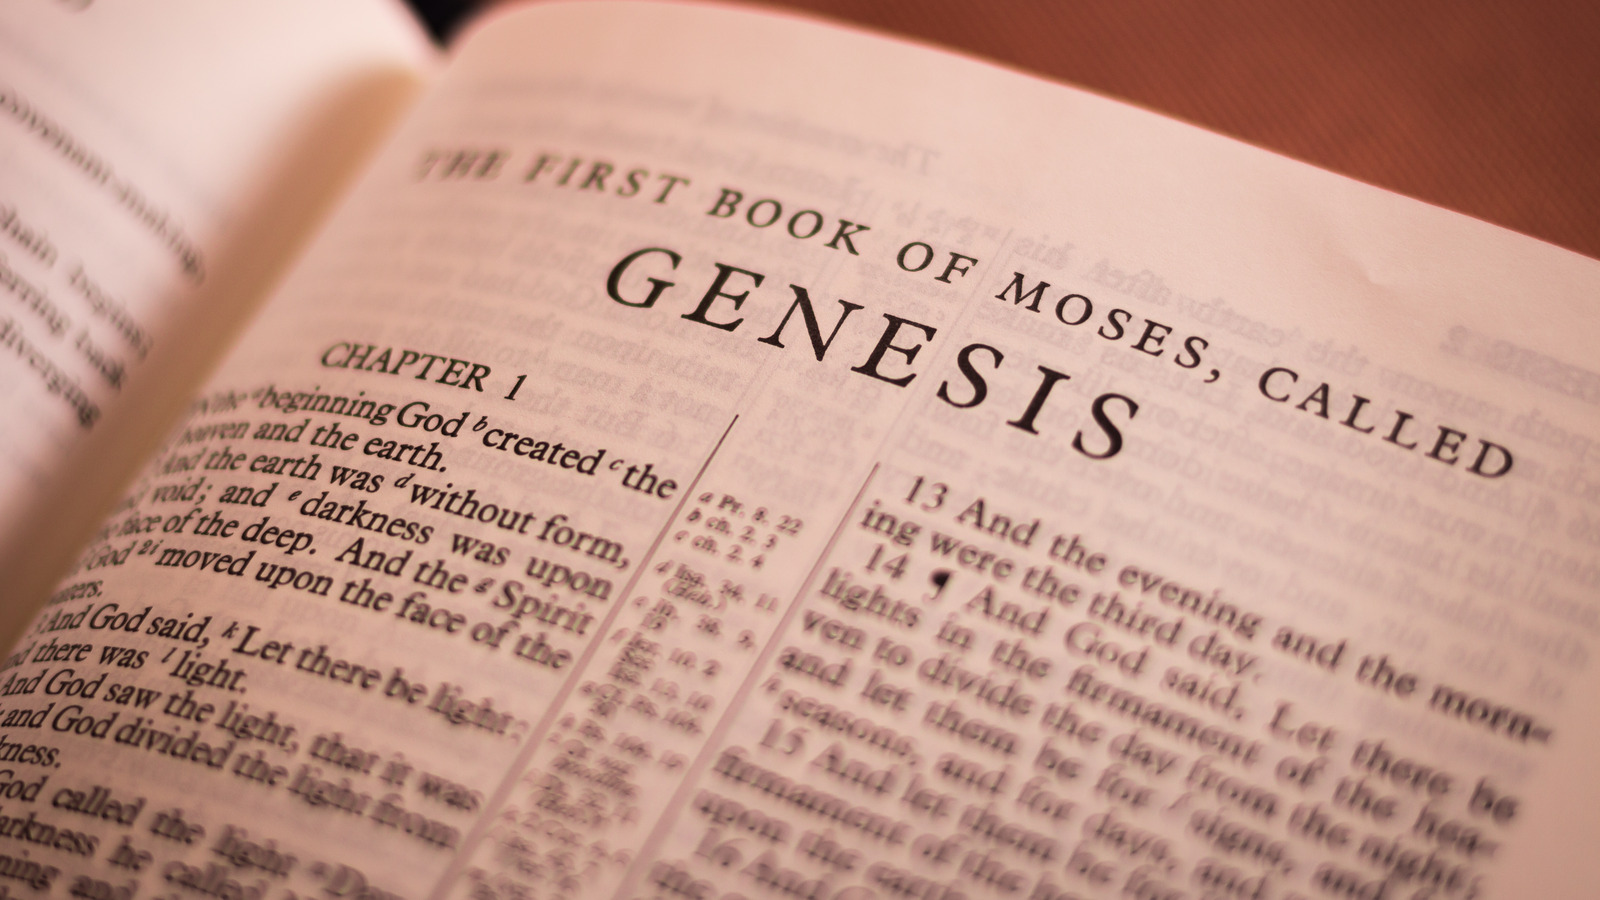 The Bible on page of book of Genesis